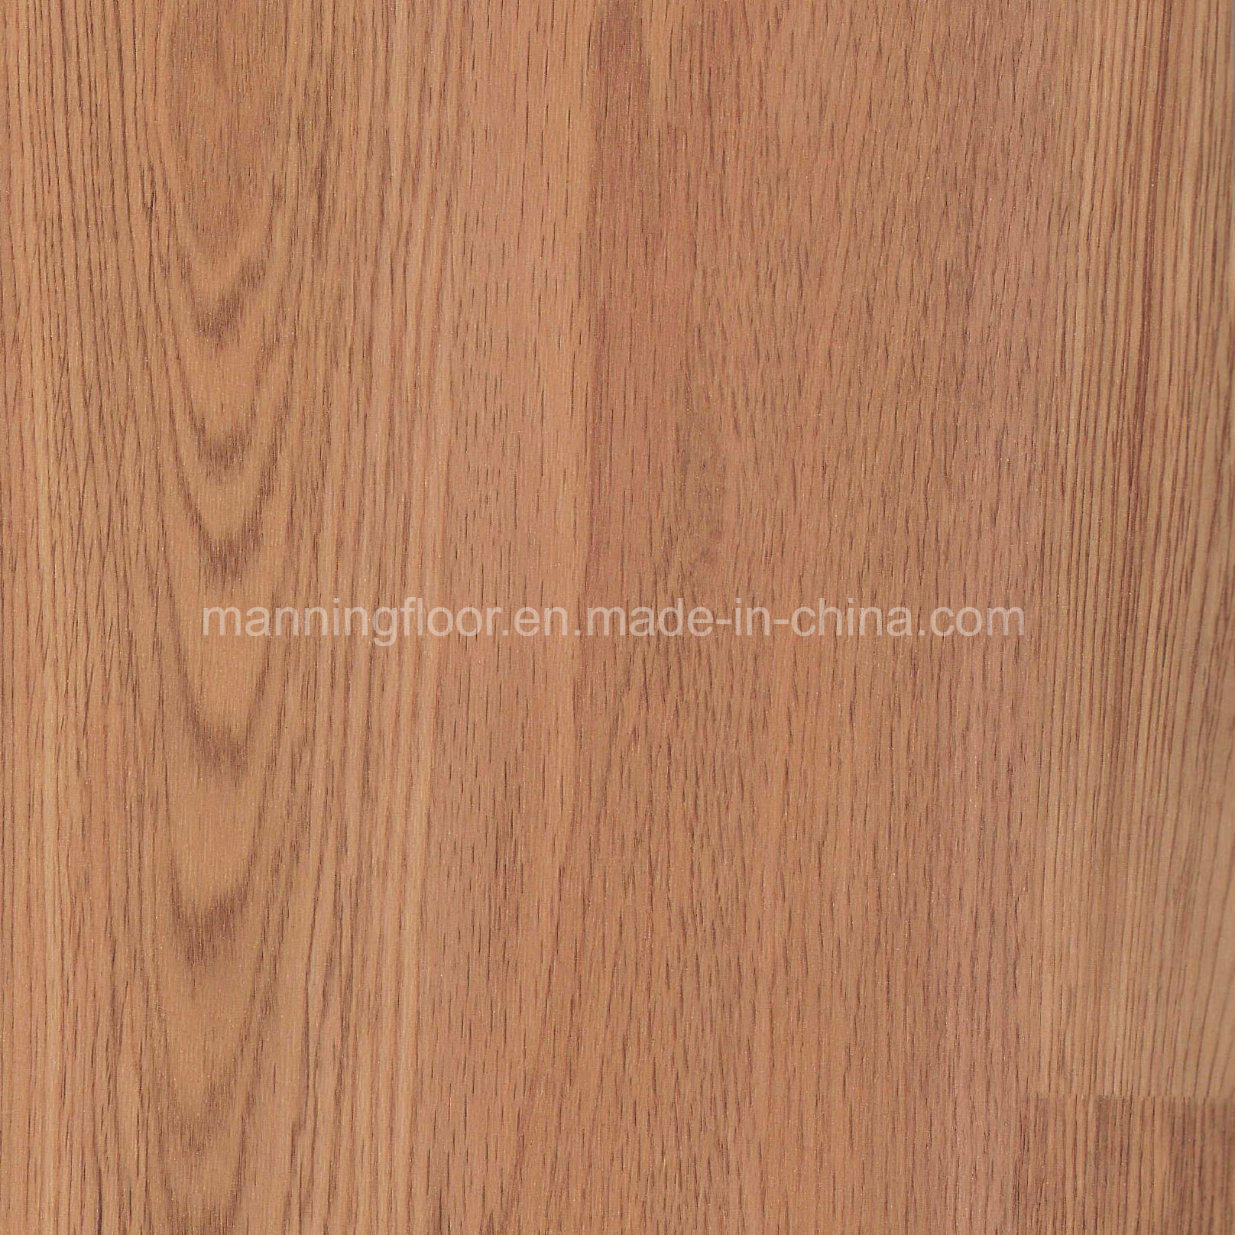 PVC Sports Flooring for Indoor Basketball Wood Pattern-8.0mm Thick Hj6811